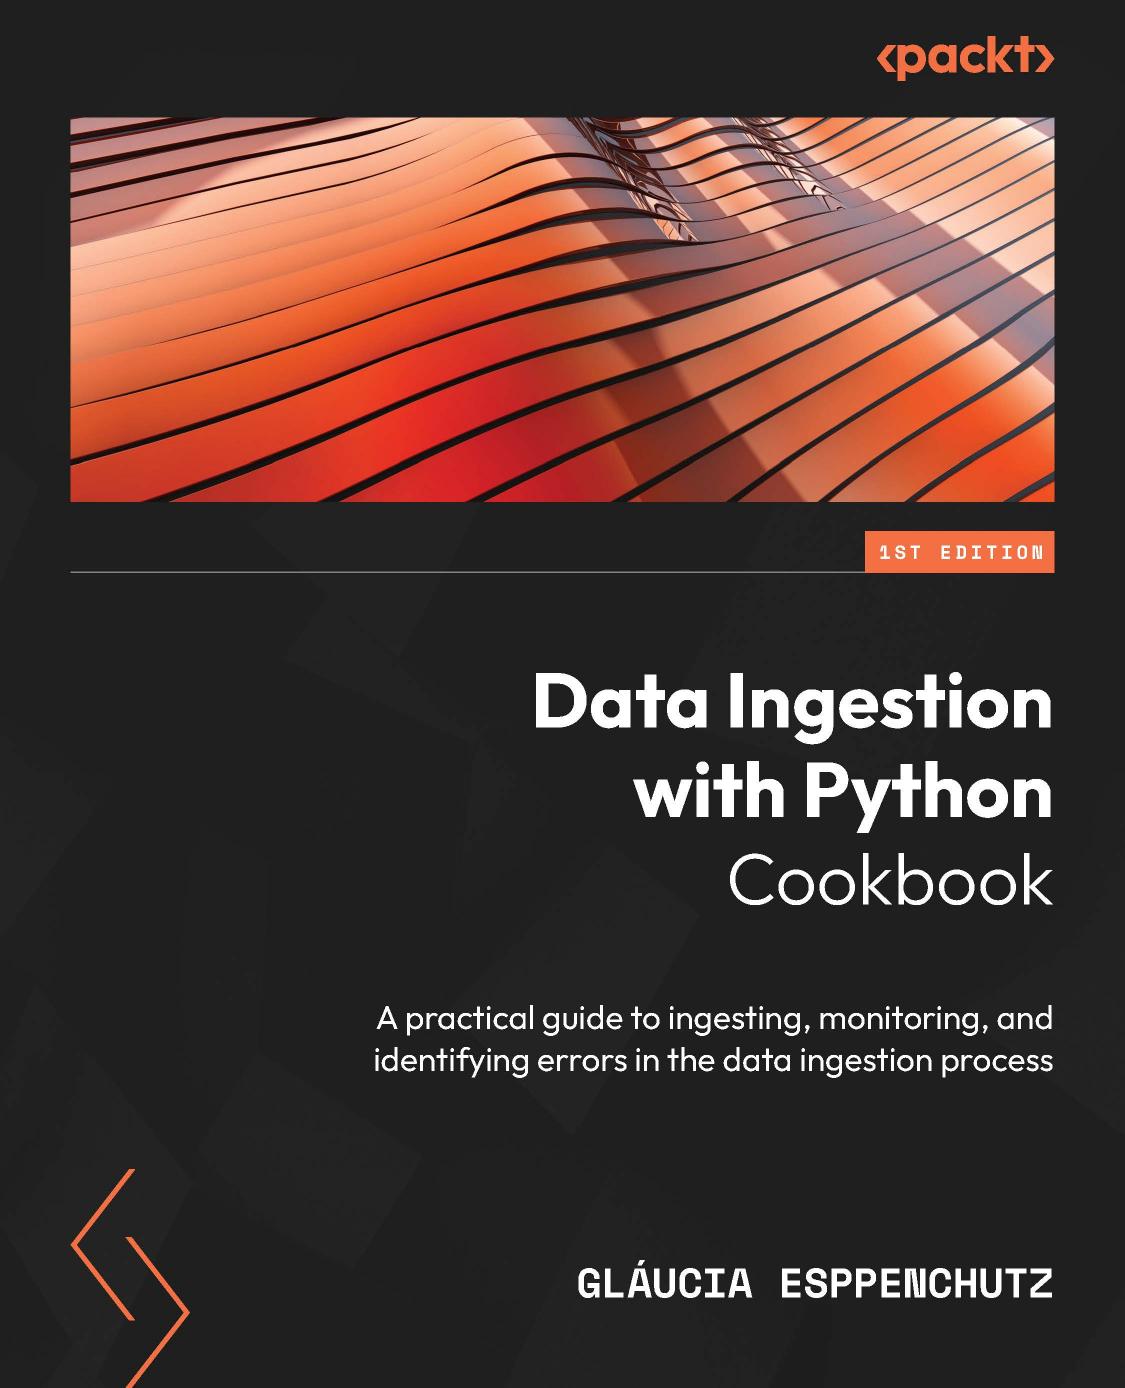 Data Ingestion With Python Cookbook: A Practical Guide to Ingesting, Monitoring, and Identifying Errors in the Data Ingestion Process